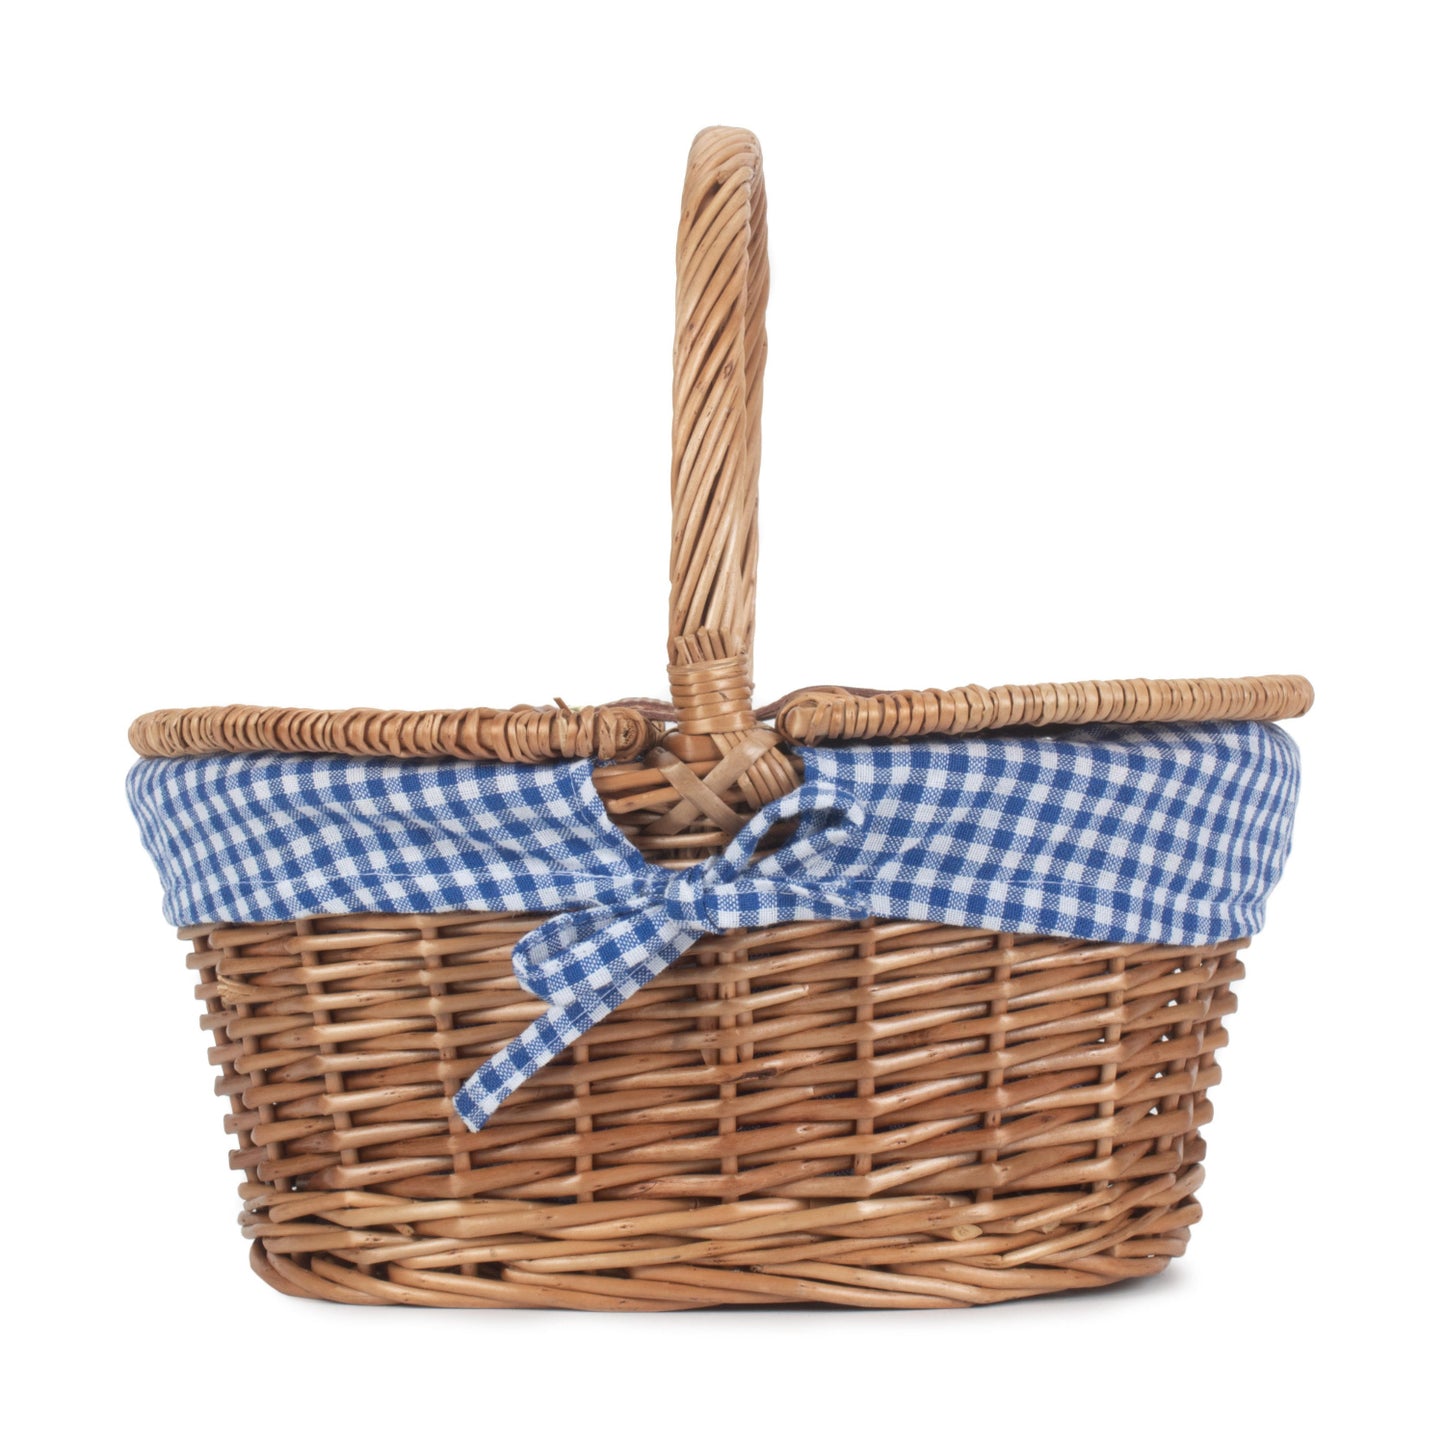 Child's Light Steamed Finish Oval Picnic Basket With Blue & White Checked Lining